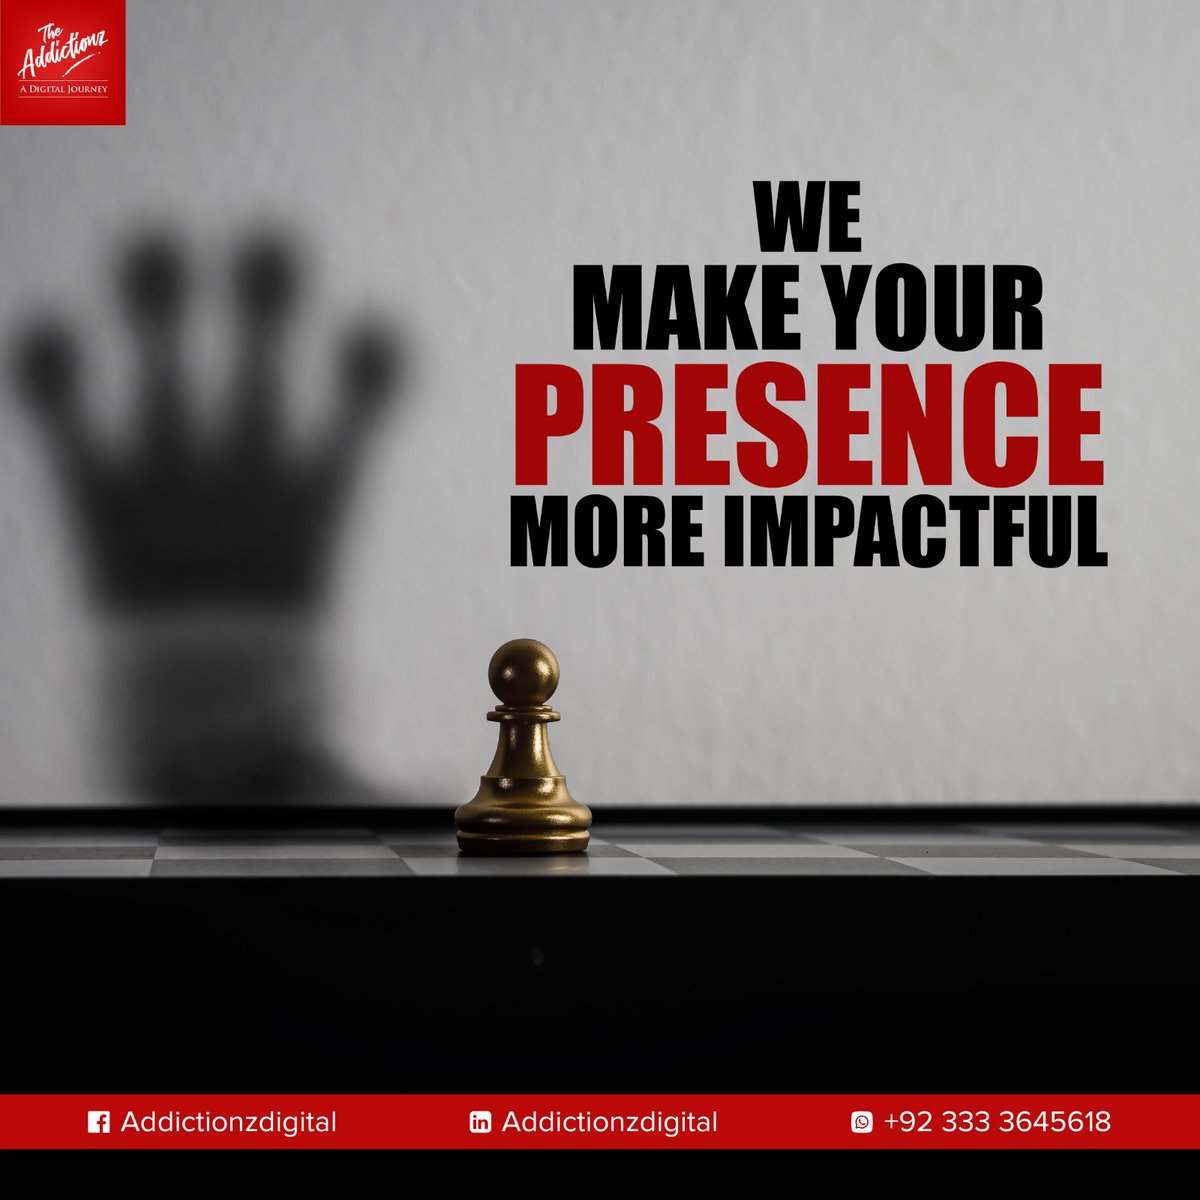 Ready to make a big impression? 
At Addictionzdigital we specialize in turning ordinary into extraordinary, and we're here to make your presence truly impactful. Get in touch today and let's create something unforgettable! #ImpactfulPresence #CreativeAgency #addictionzdigital